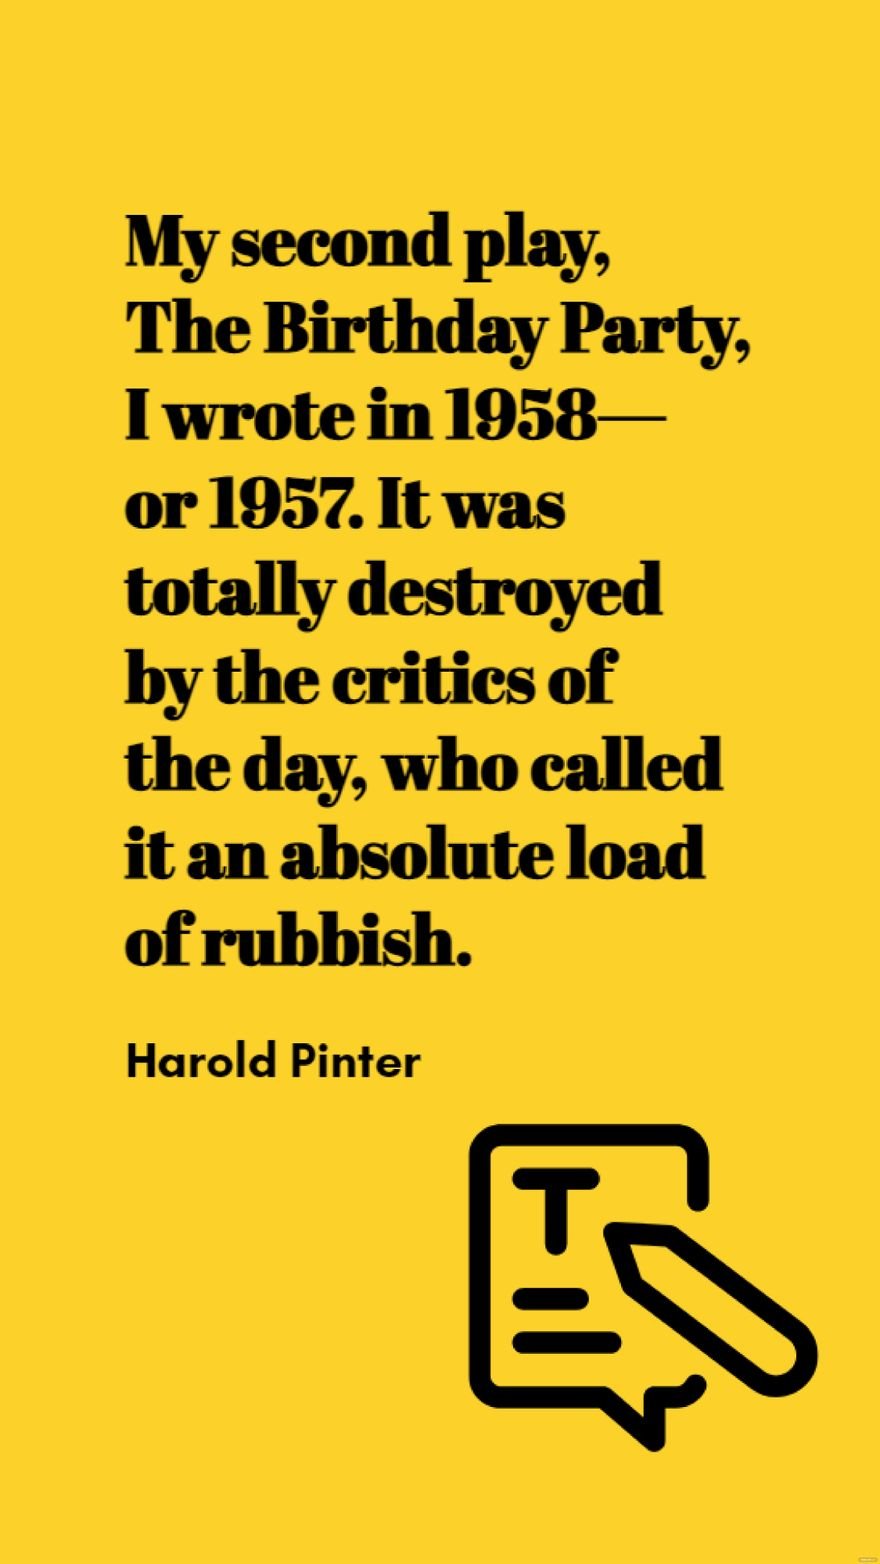 Harold Pinter - My second play, The Birthday Party, I wrote in 1958 - or 1957. It was totally destroyed by the critics of the day, who called it an absolute load of rubbish. in JPG